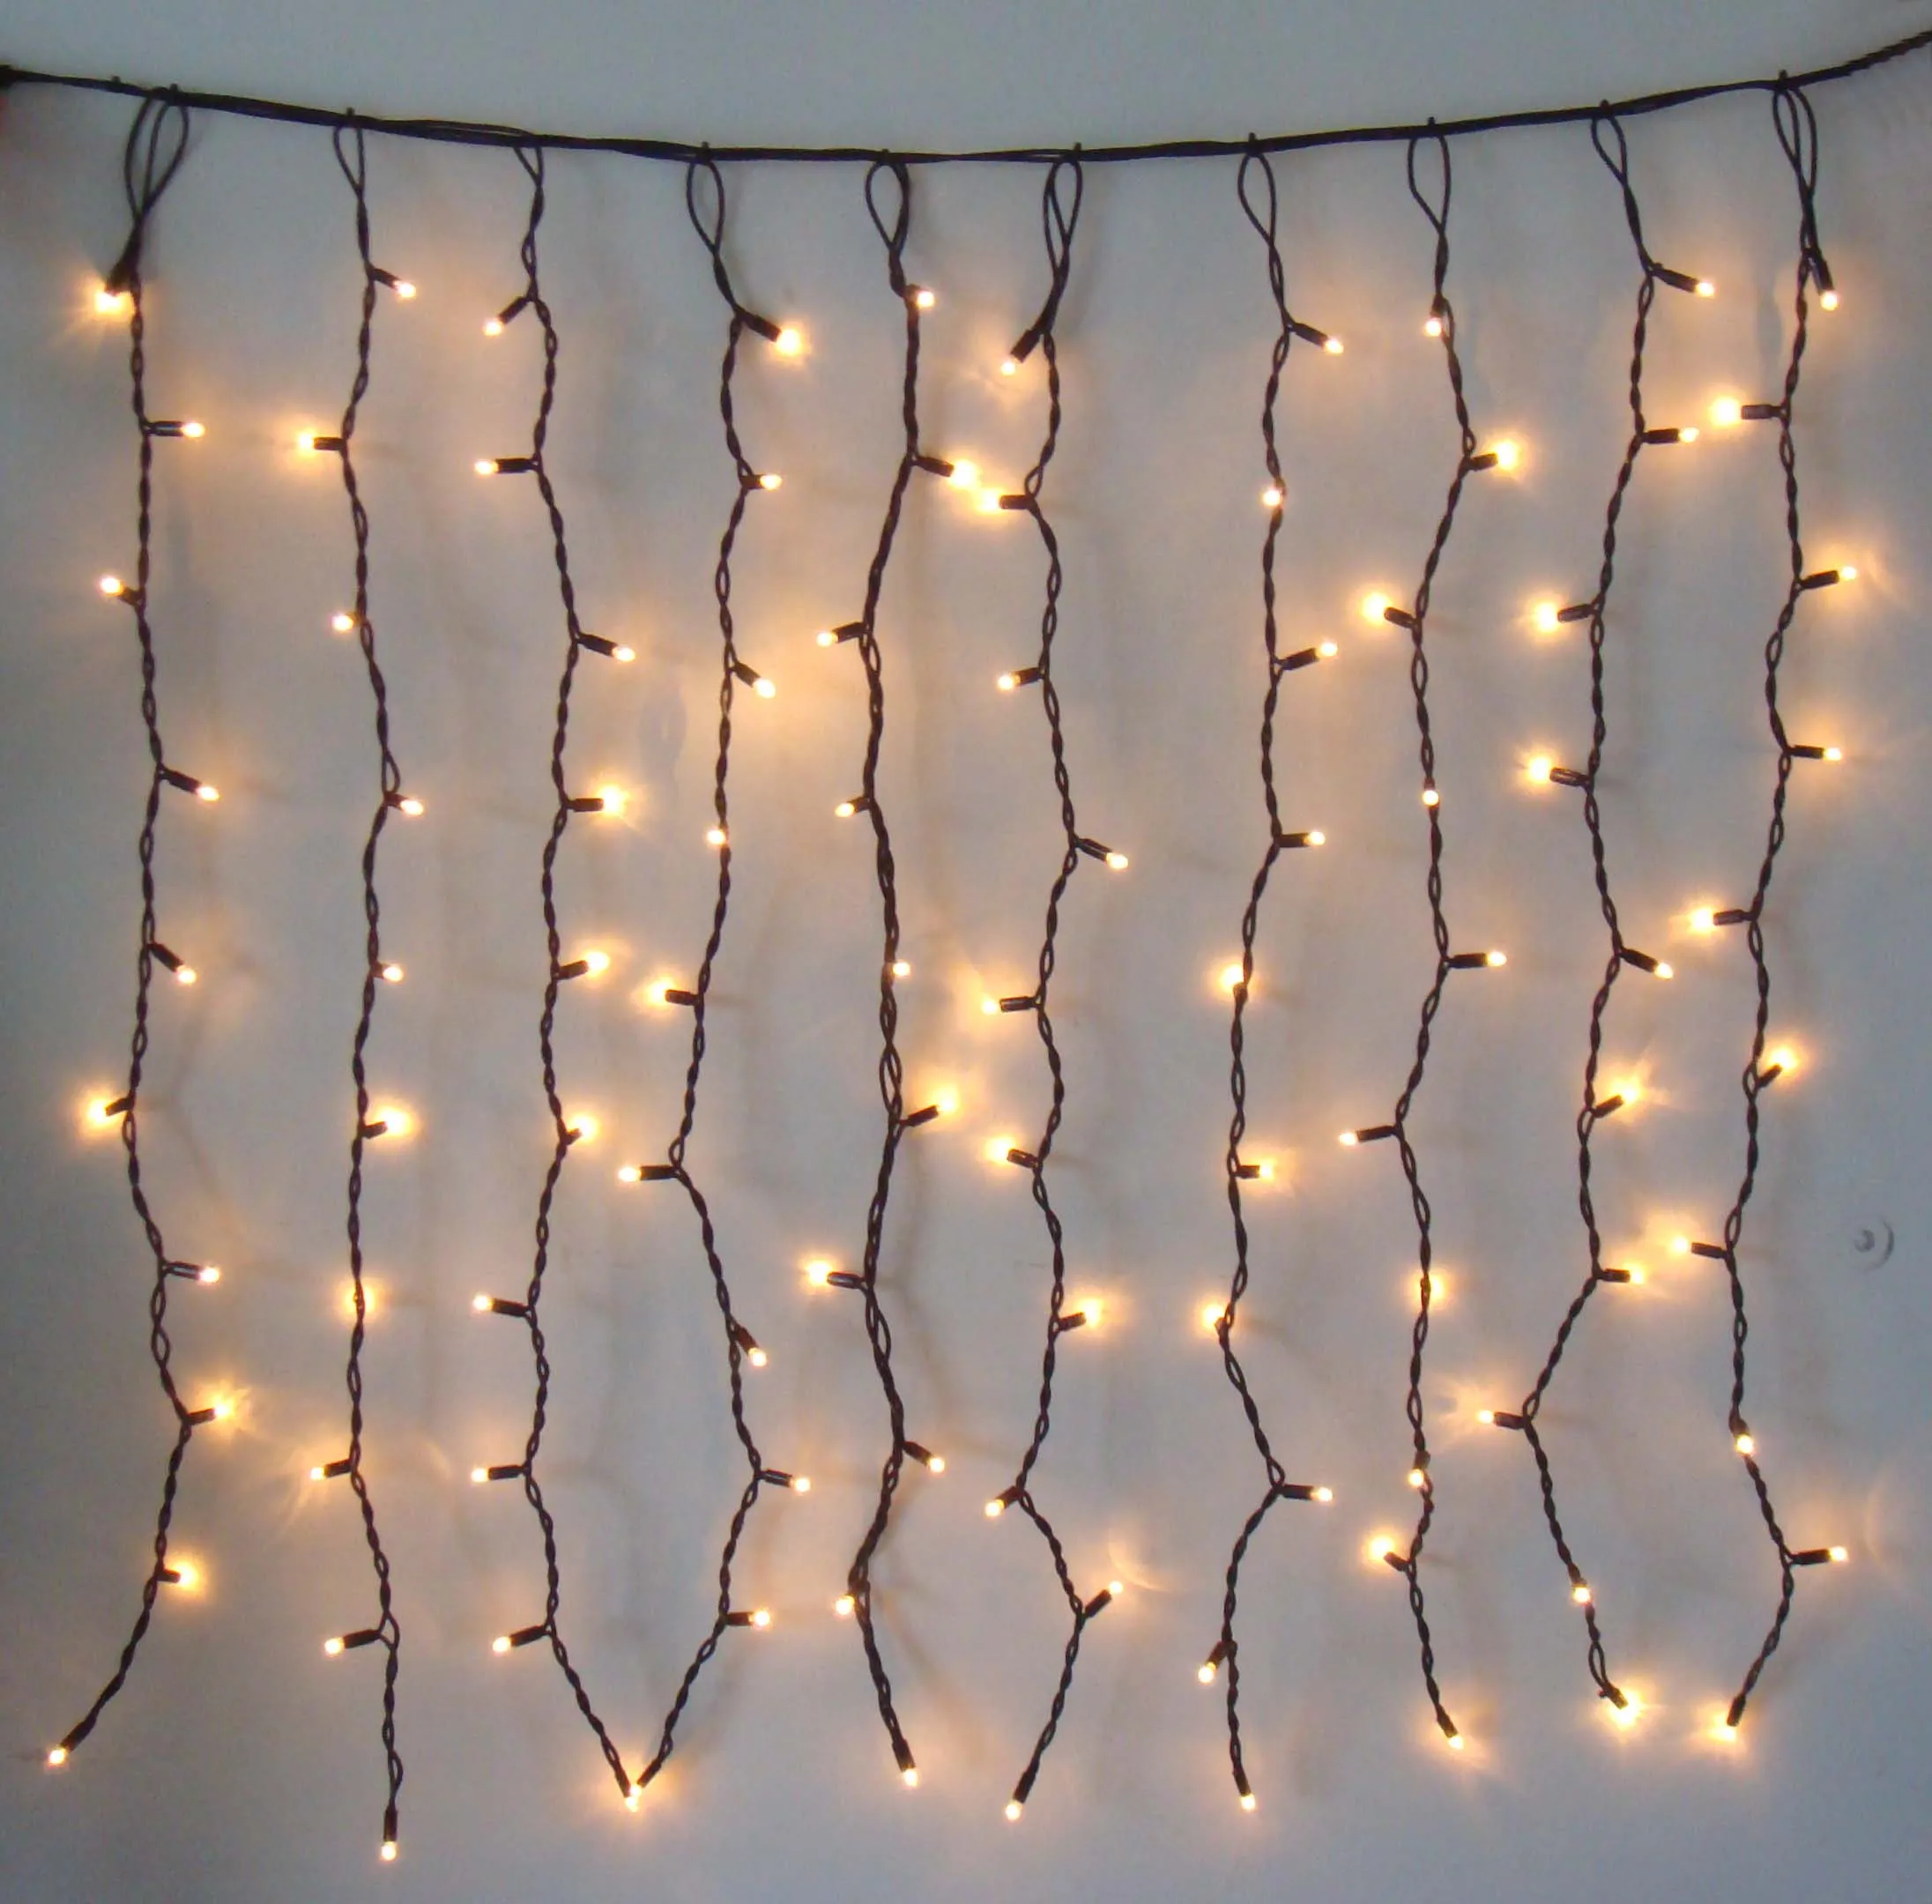 High Quality Icicle Light Christmas Decoration Light for Indoor Home